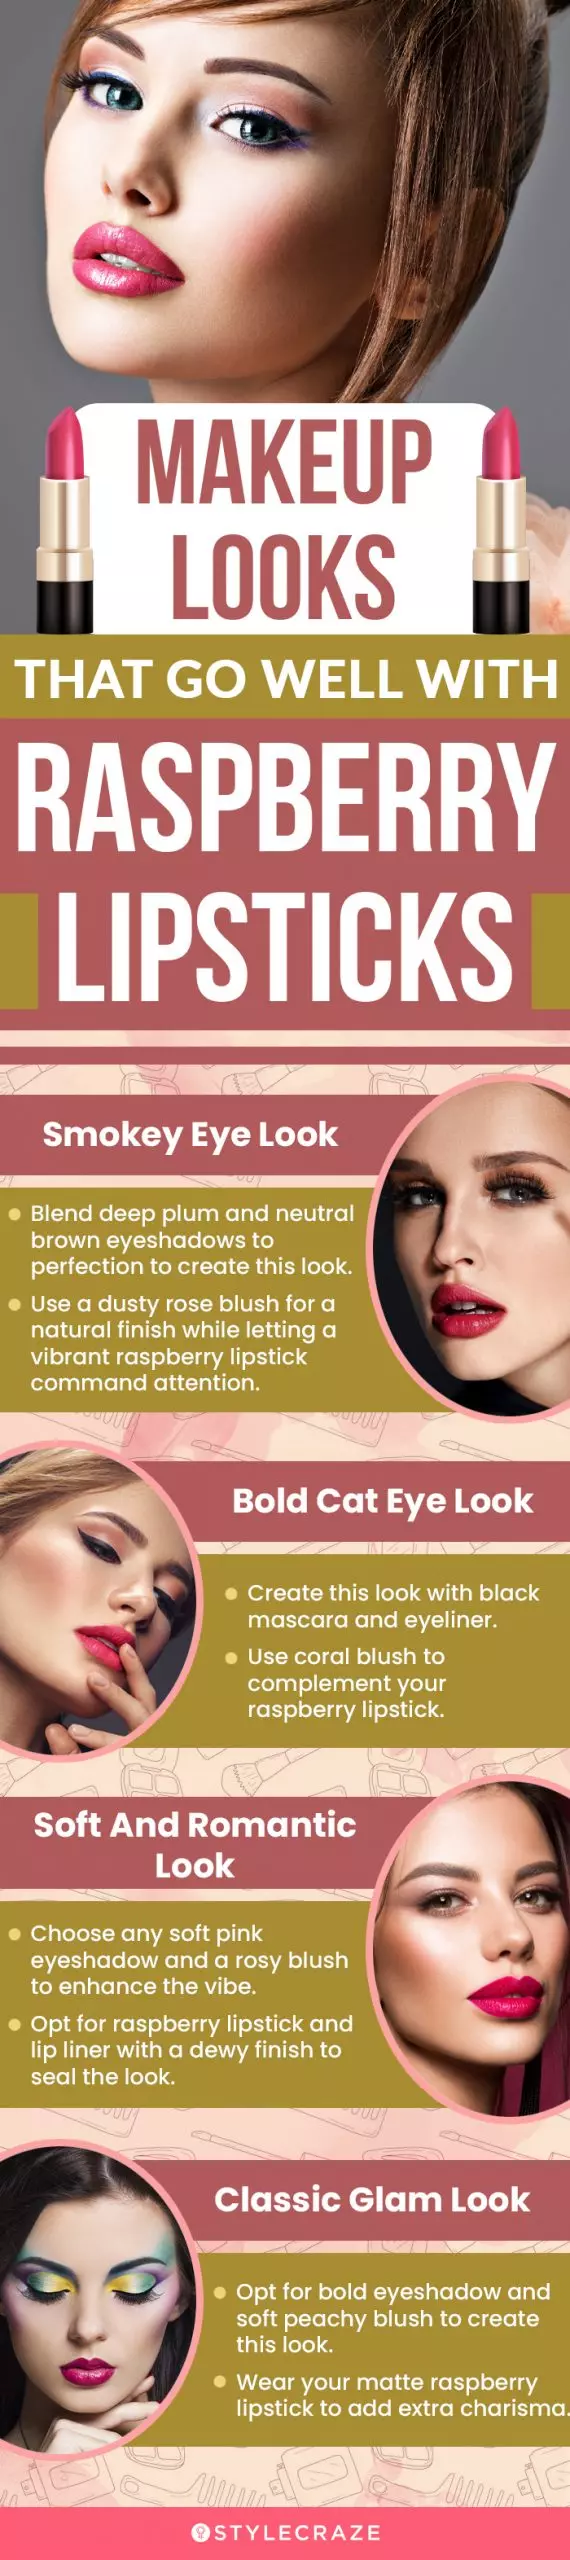 Makeup Looks That Go well With Raspberry Lipsticks (infographic)